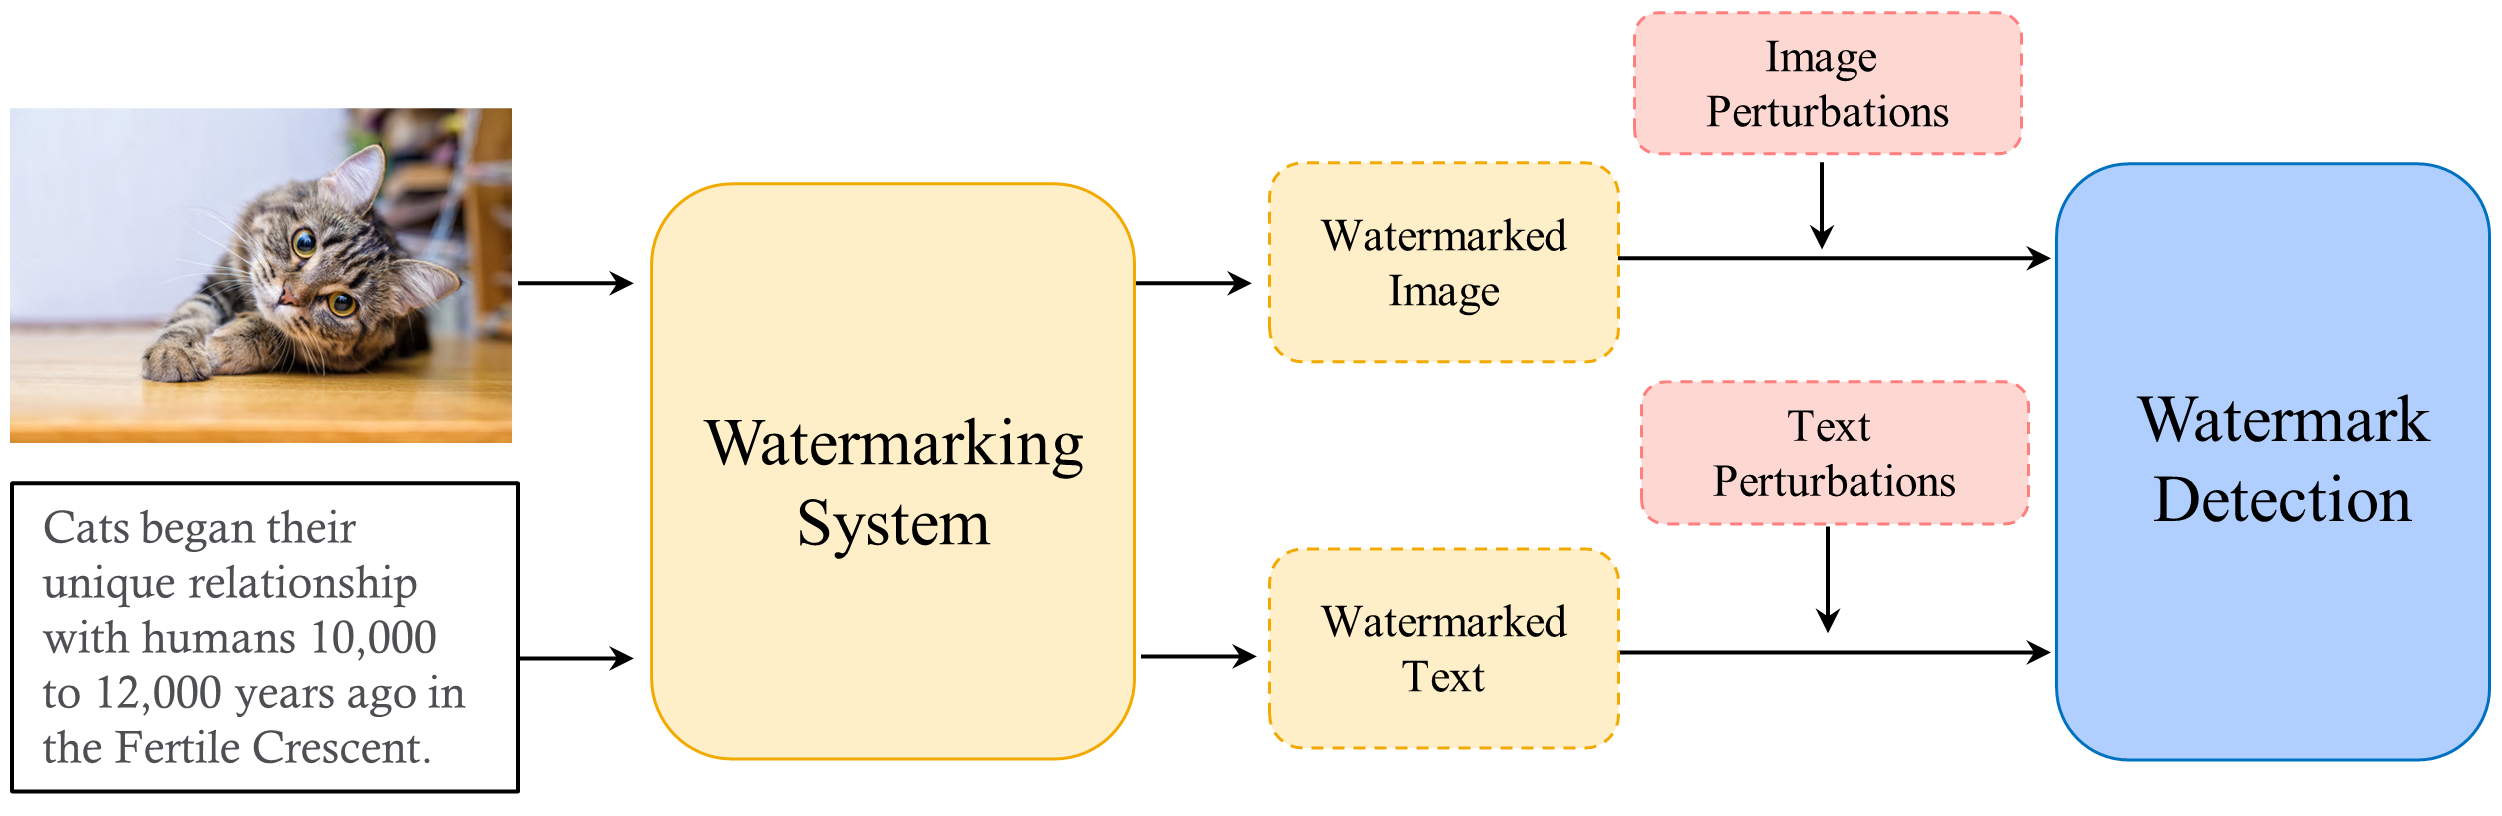 Evaluating Durability: Benchmark Insights into Multimodal Watermarking